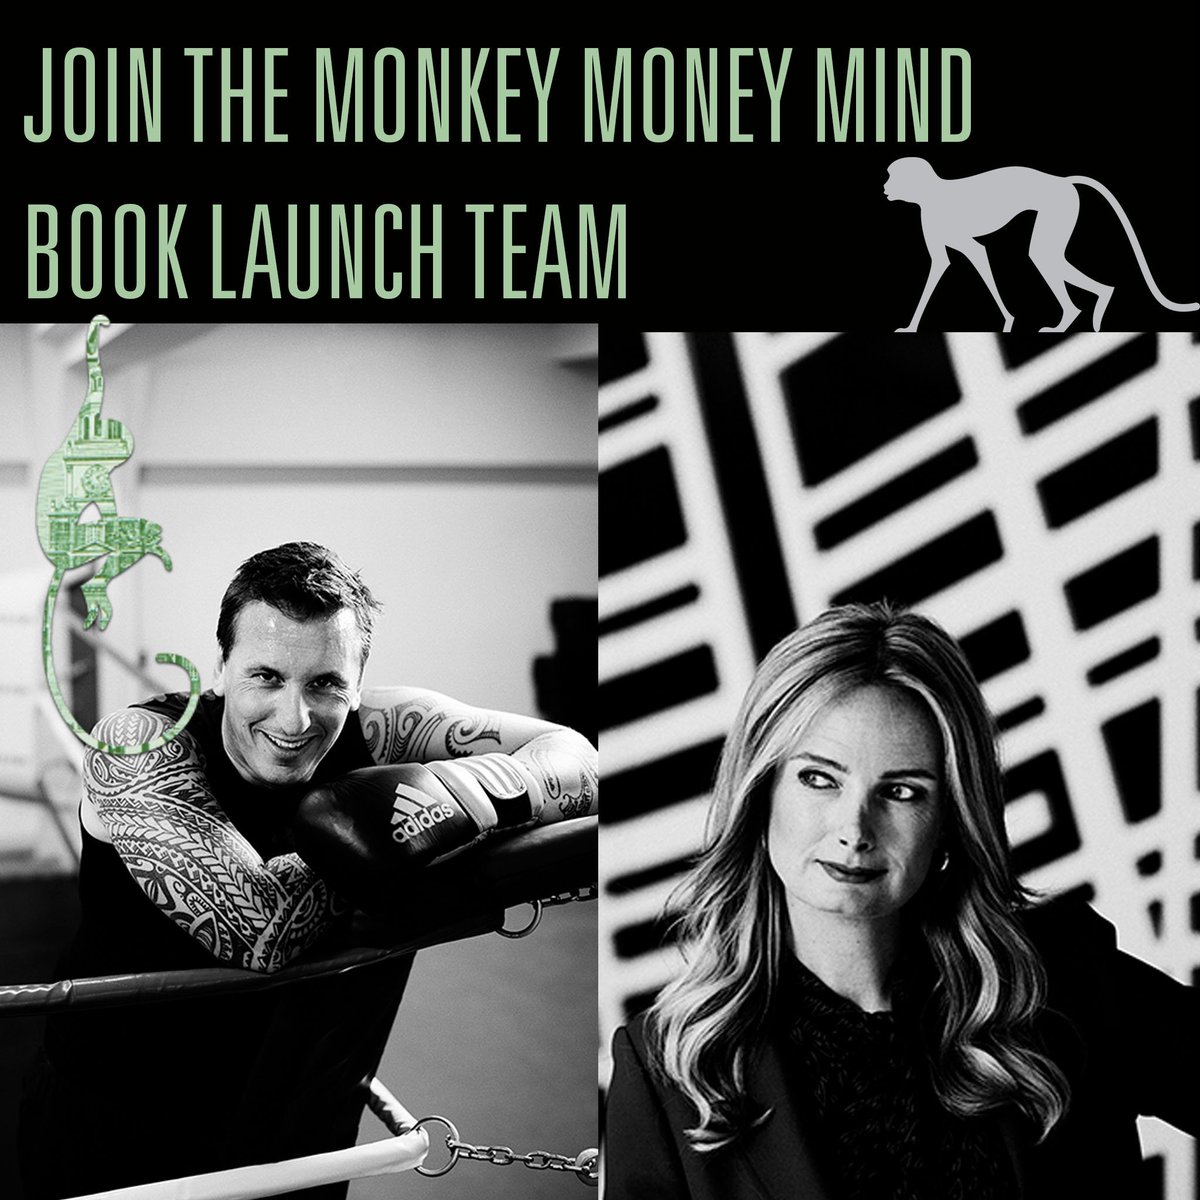 Ever wondered how you write and publish a #book? Join the Exclusive Book Launch Team for the @ForbesBooks #MonkeyMoneyMind Book to find out and get lots of #Perks GO TO THE FACEBOOK PAGE AND CHECK IT OUT: bit.ly/2ELsA3i#bookla… #like #followme #ilovebooks